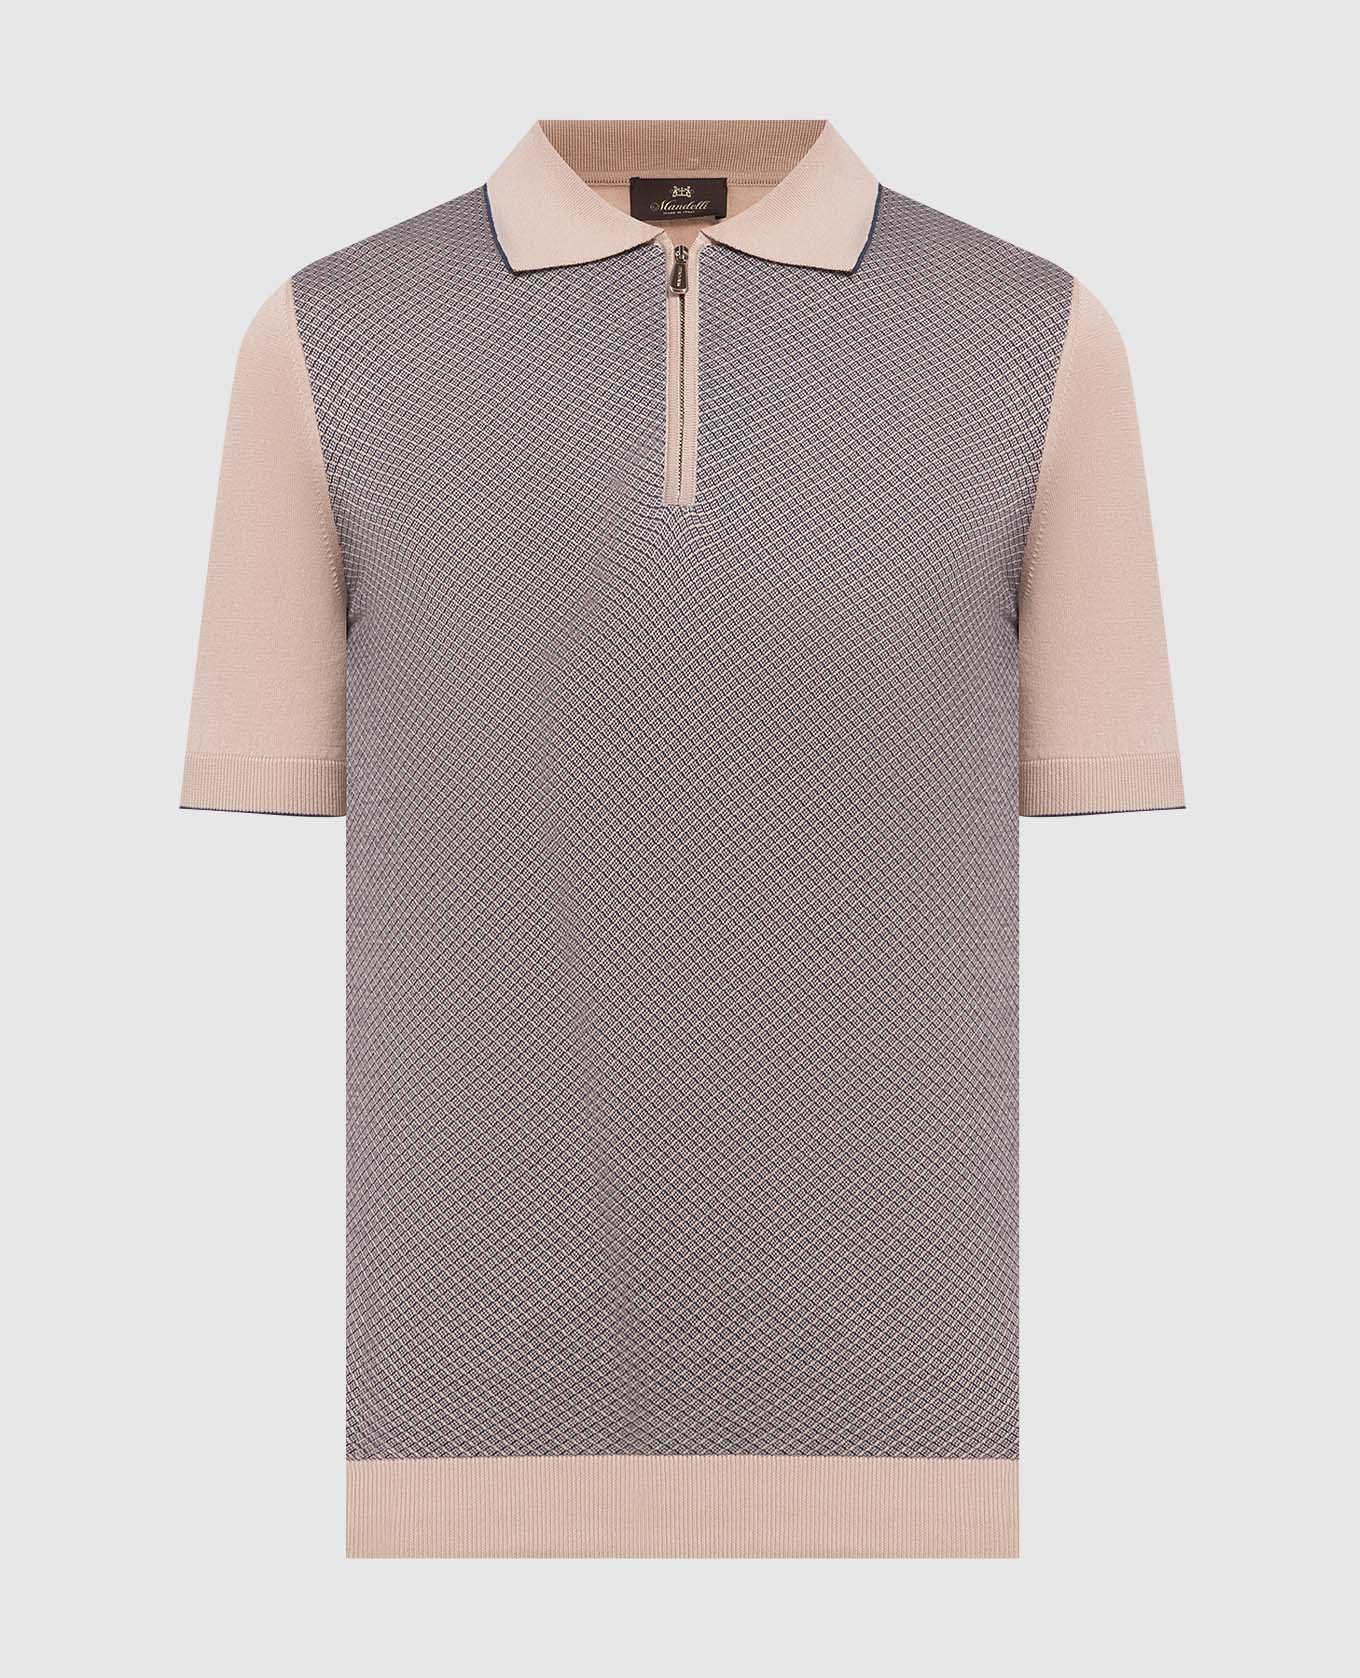 Brown patterned polo shirt